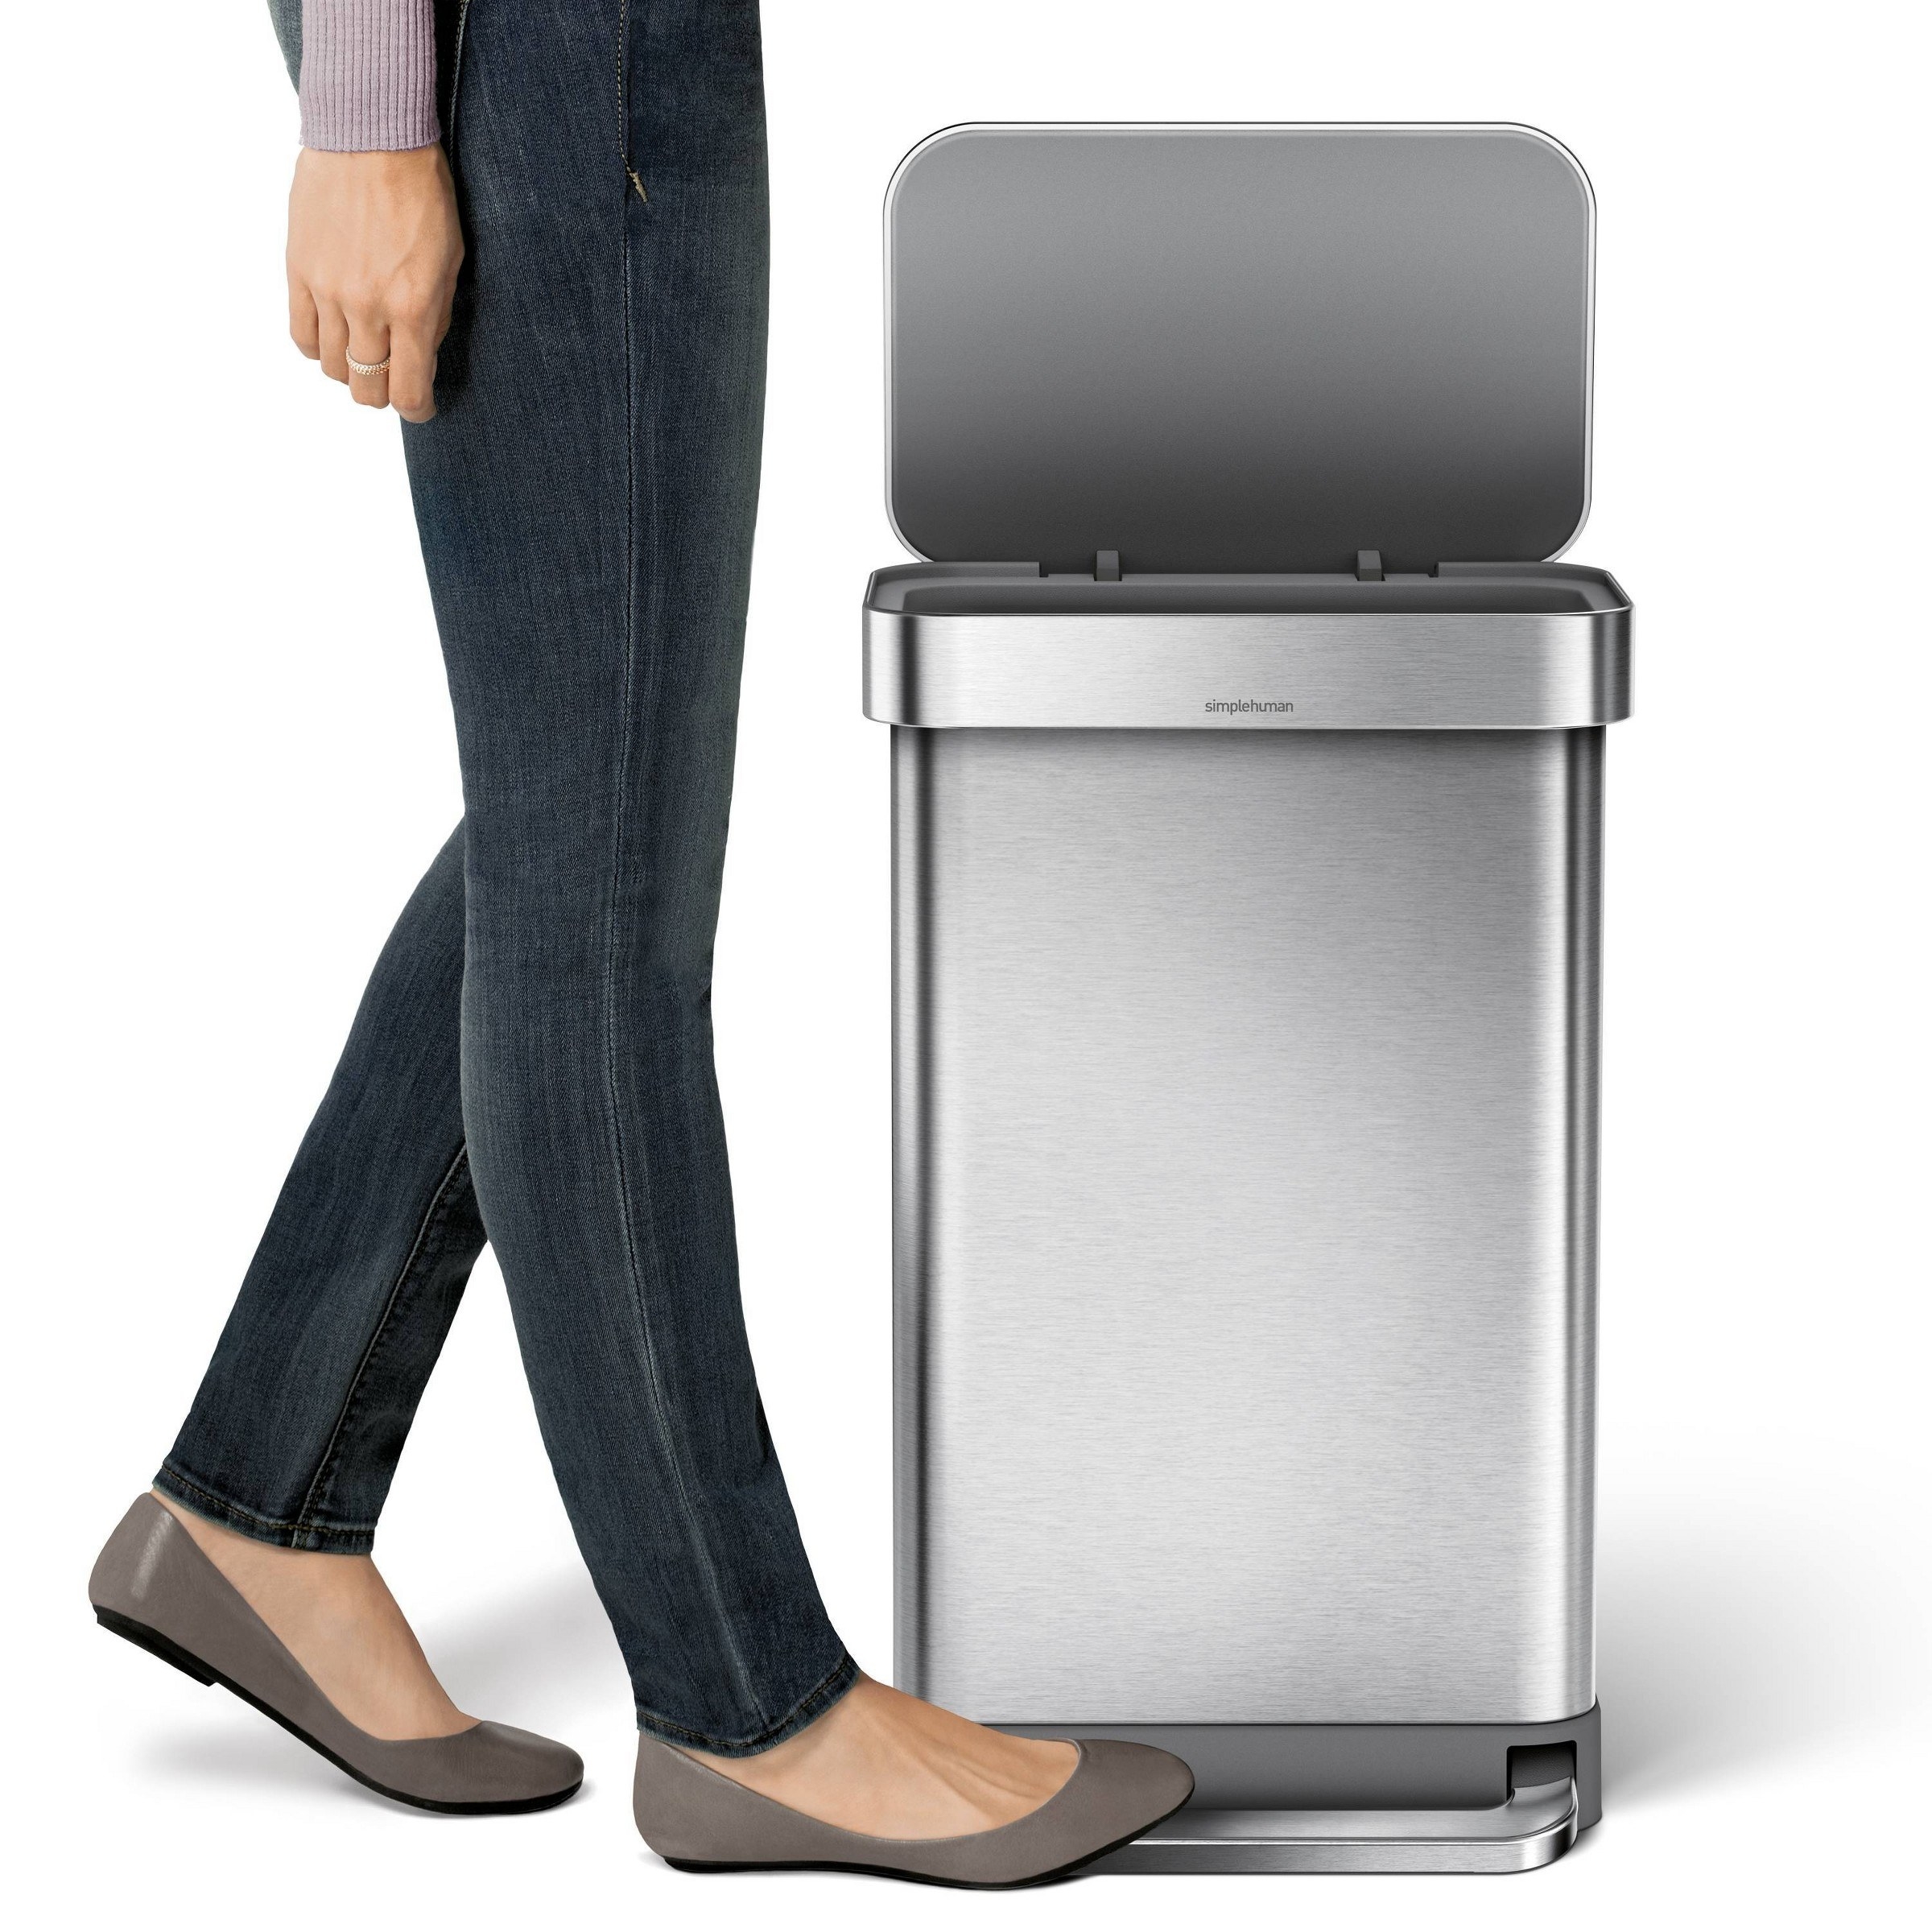 a model stepping on the trash can to open it